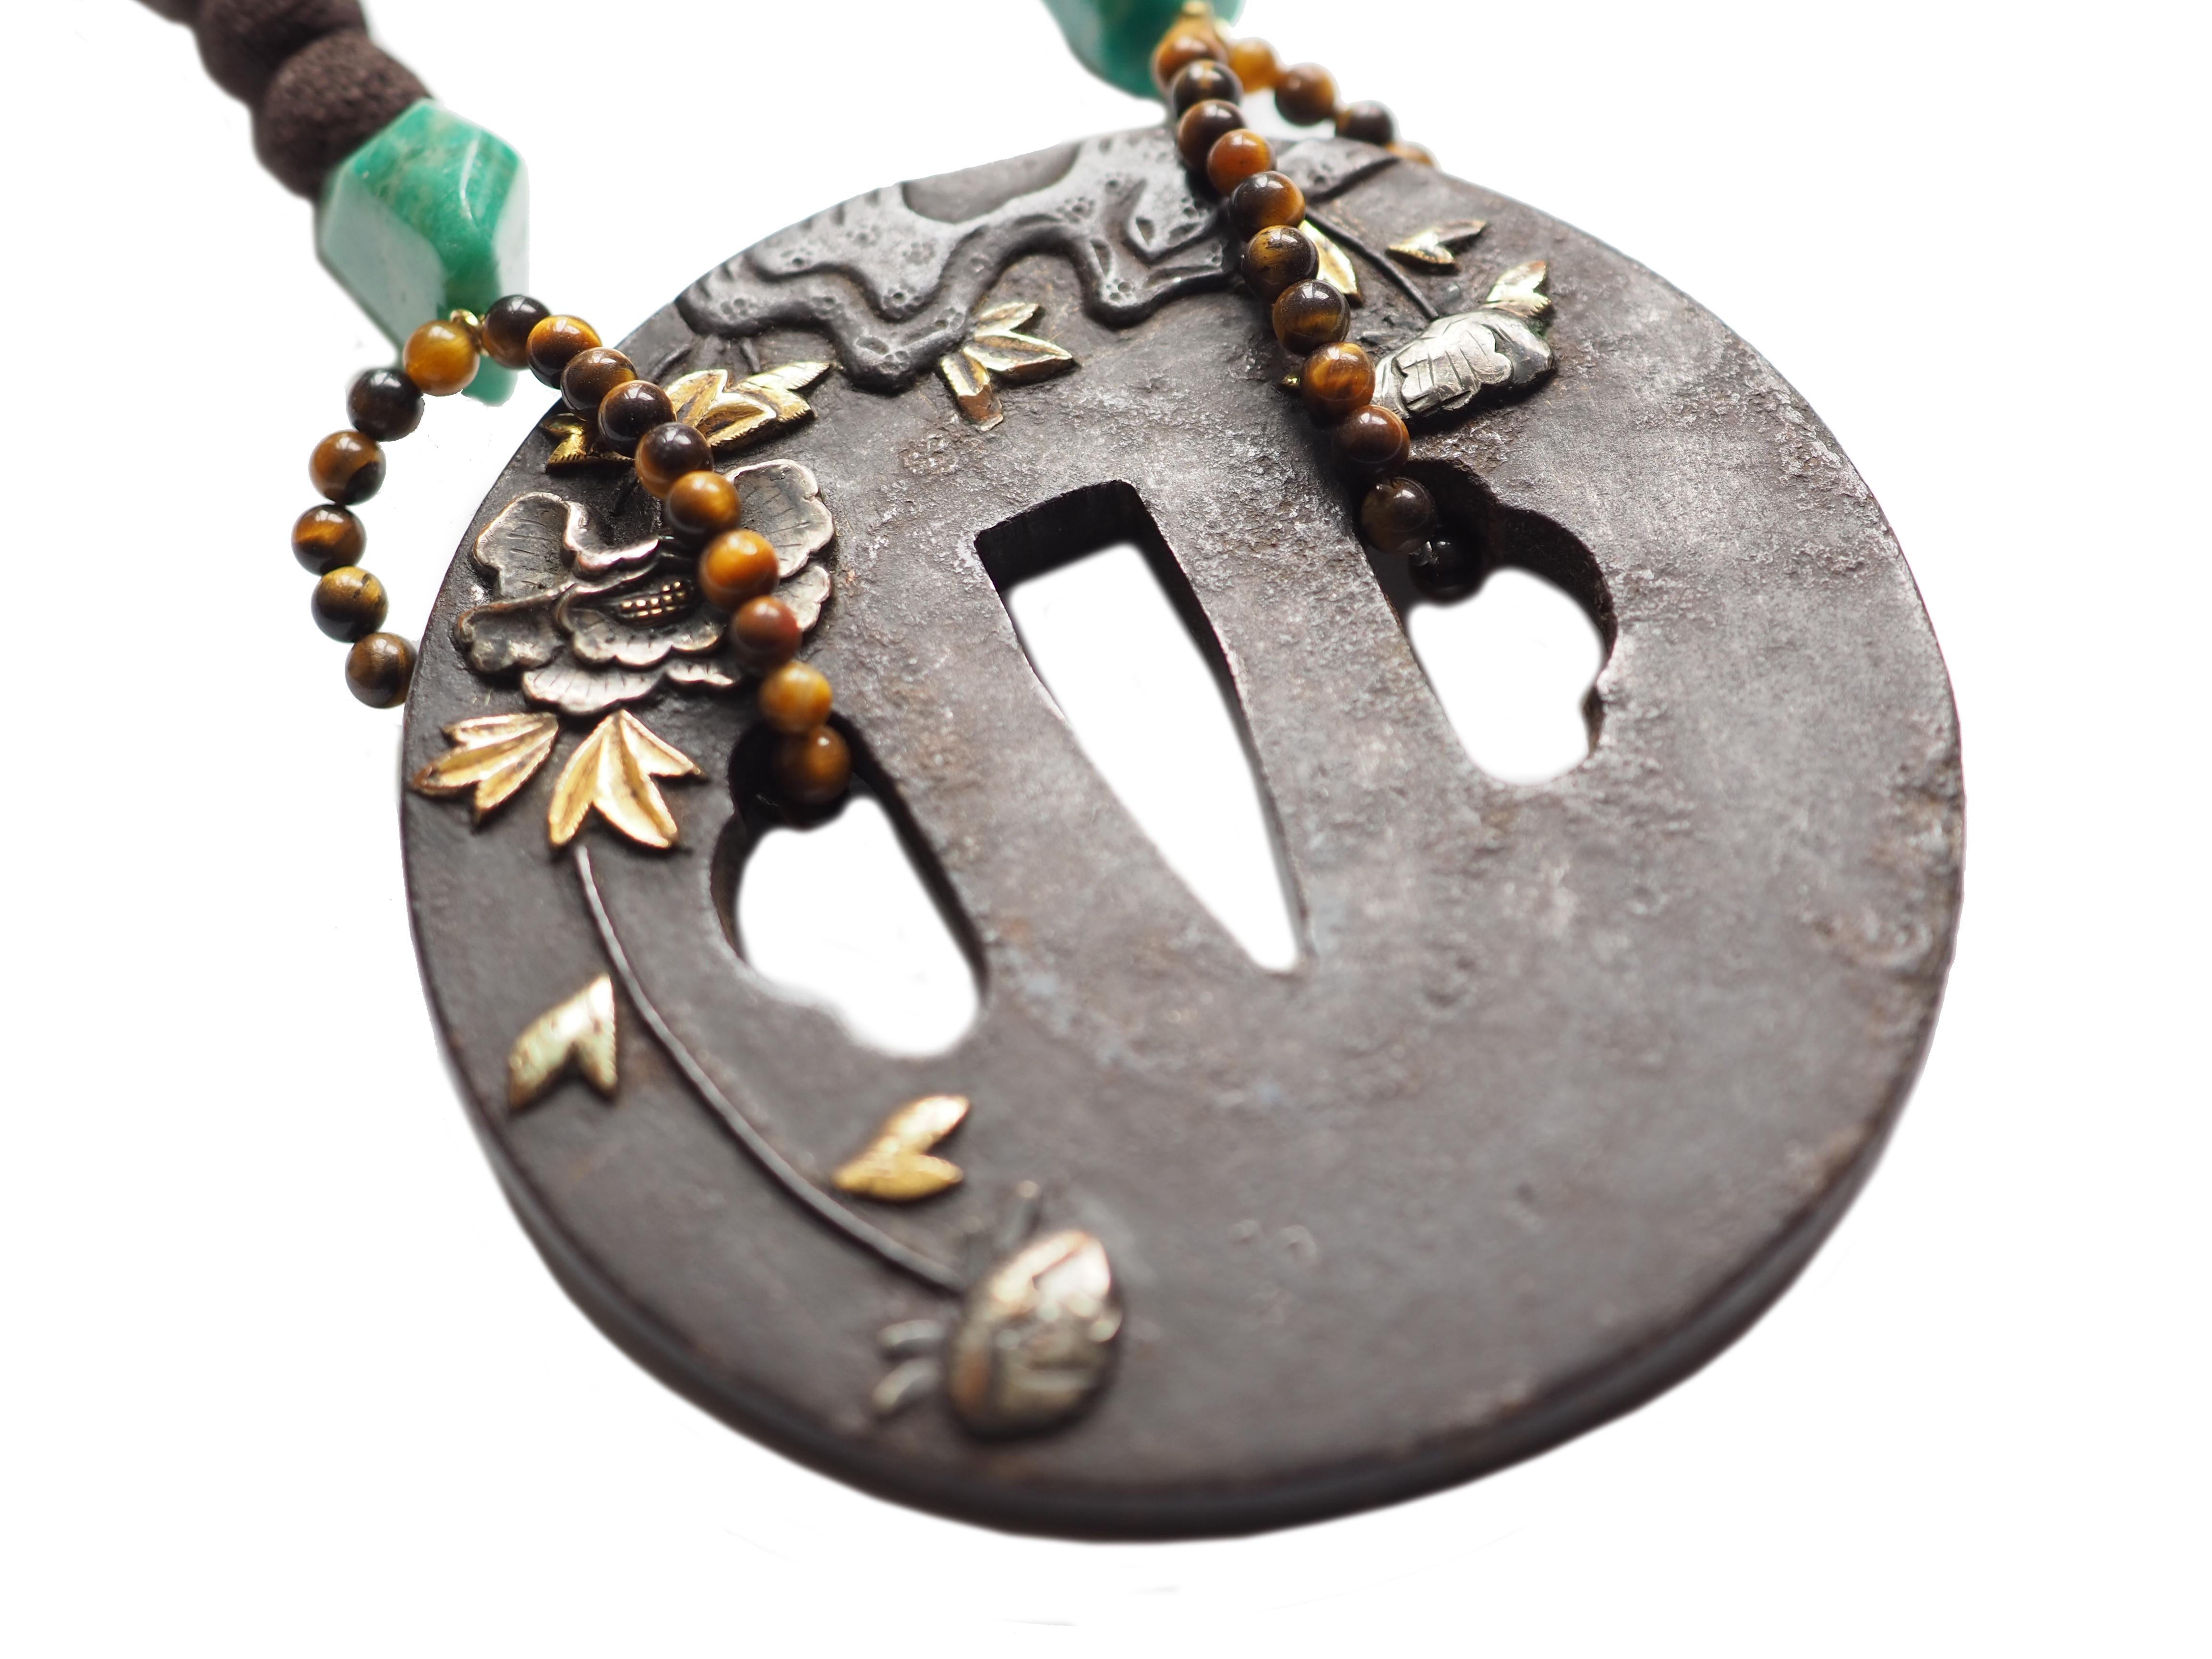 Long Necklace with Madrepora Coral Amazzonite  tiger eye's Antiques  Japanies Tsuba. Length 80cm
Tsuba are the antiques Samurai hand garden of Japanies sward. The  Tsuba balanced the sword and protect the hand of sword holder  but at the same time